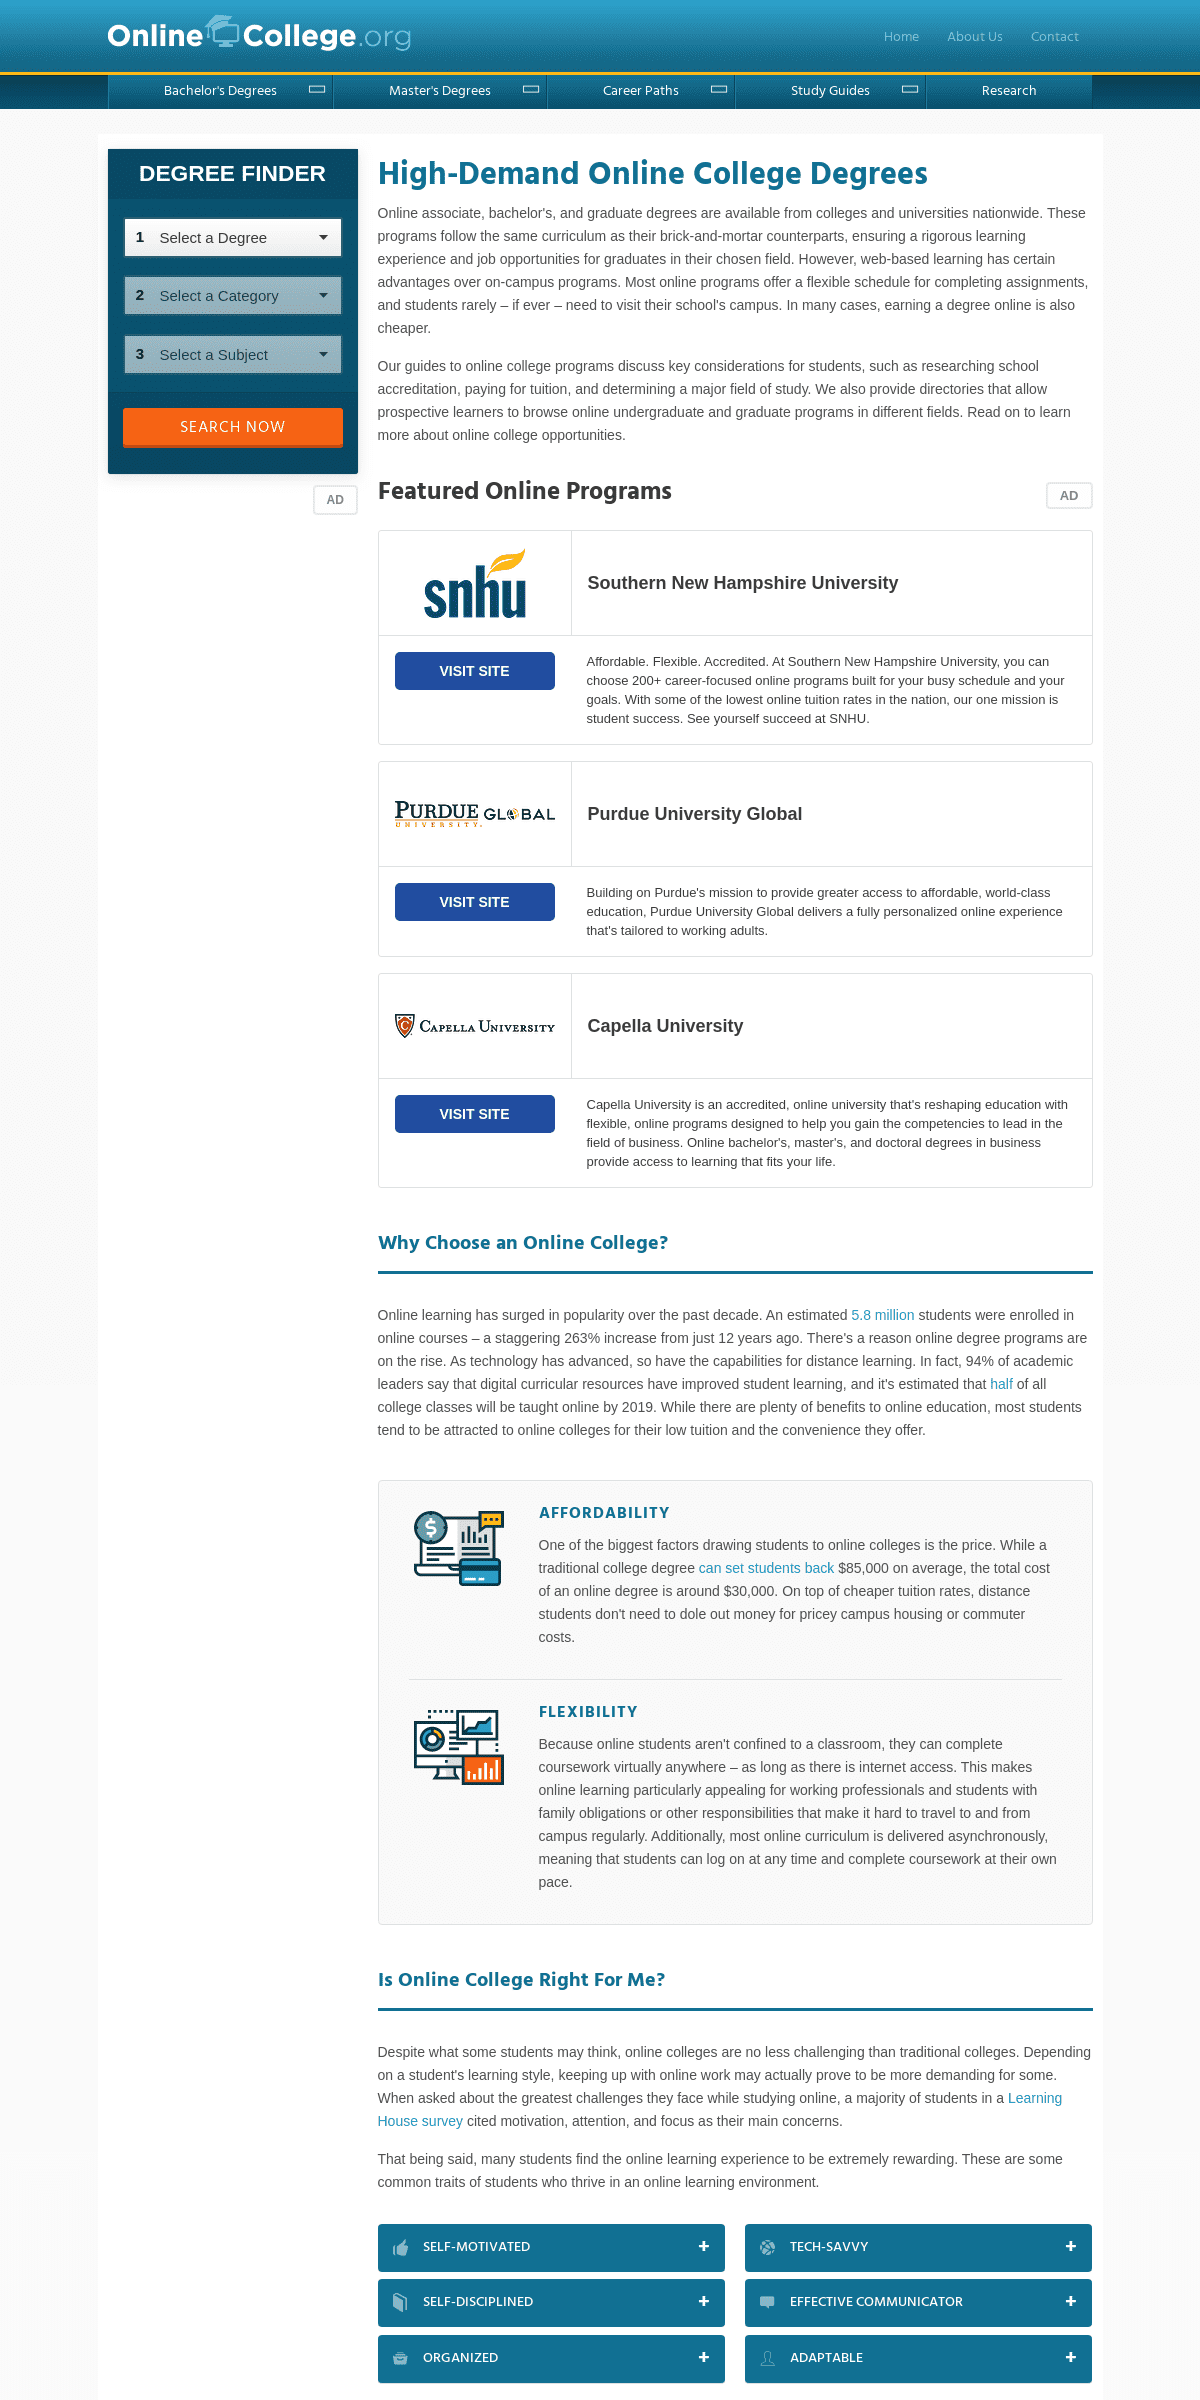 A complete backup of onlinecollege.org